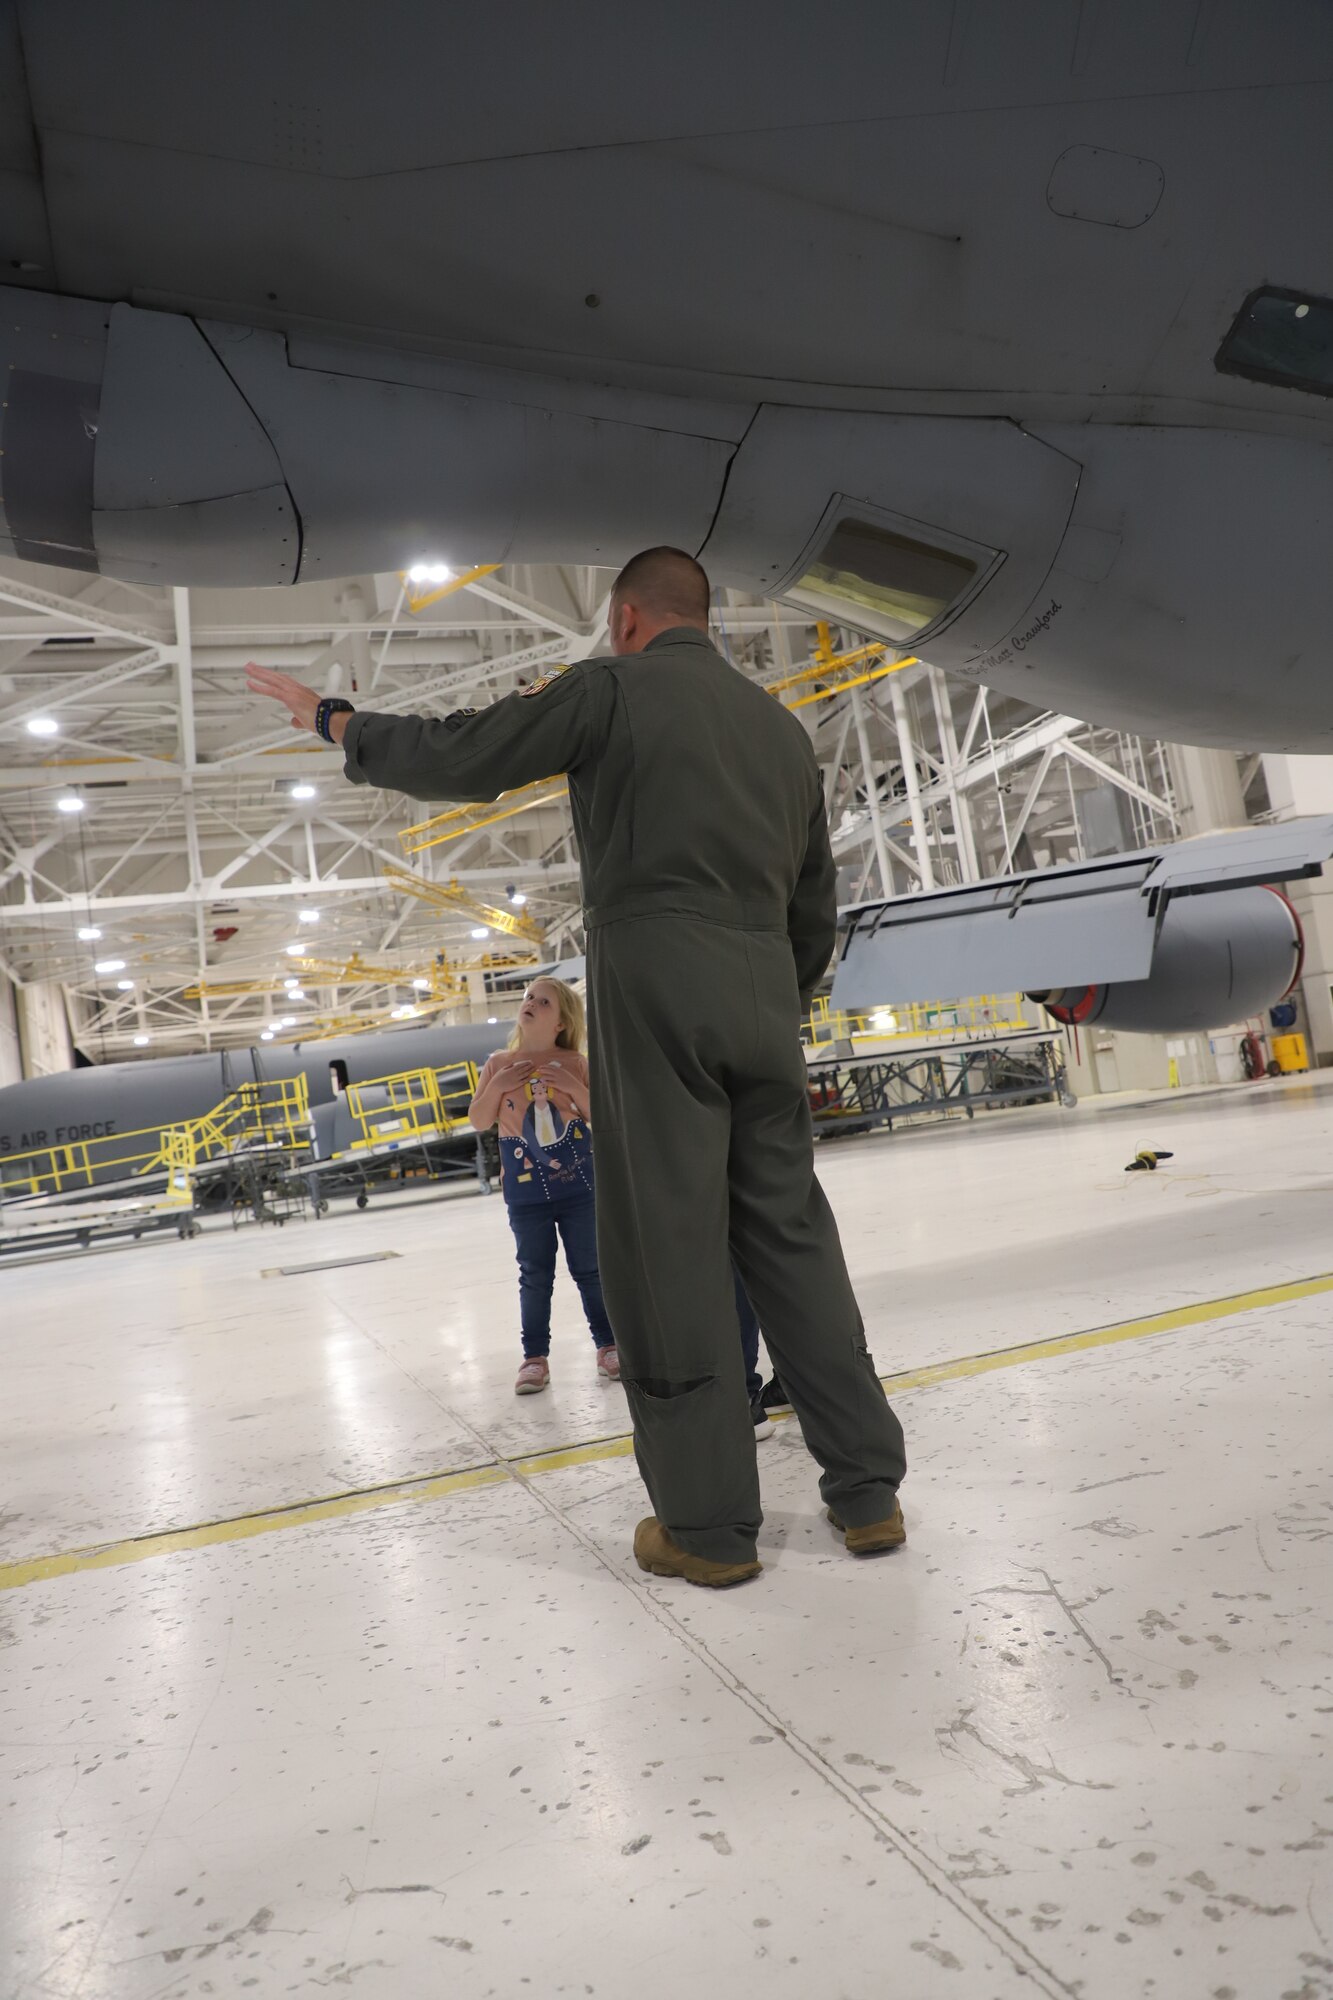 Tinley Benyshek, Pilot for the Day, is shown underneath a KC-135 by SMSgt Nathan Neidhardt, senior evaluator boom at the 190th Air Refueling Wing in Topeka, KS, October 24, 2022. Tinley is the first Pilot for a Day participant at the 190th ARW.